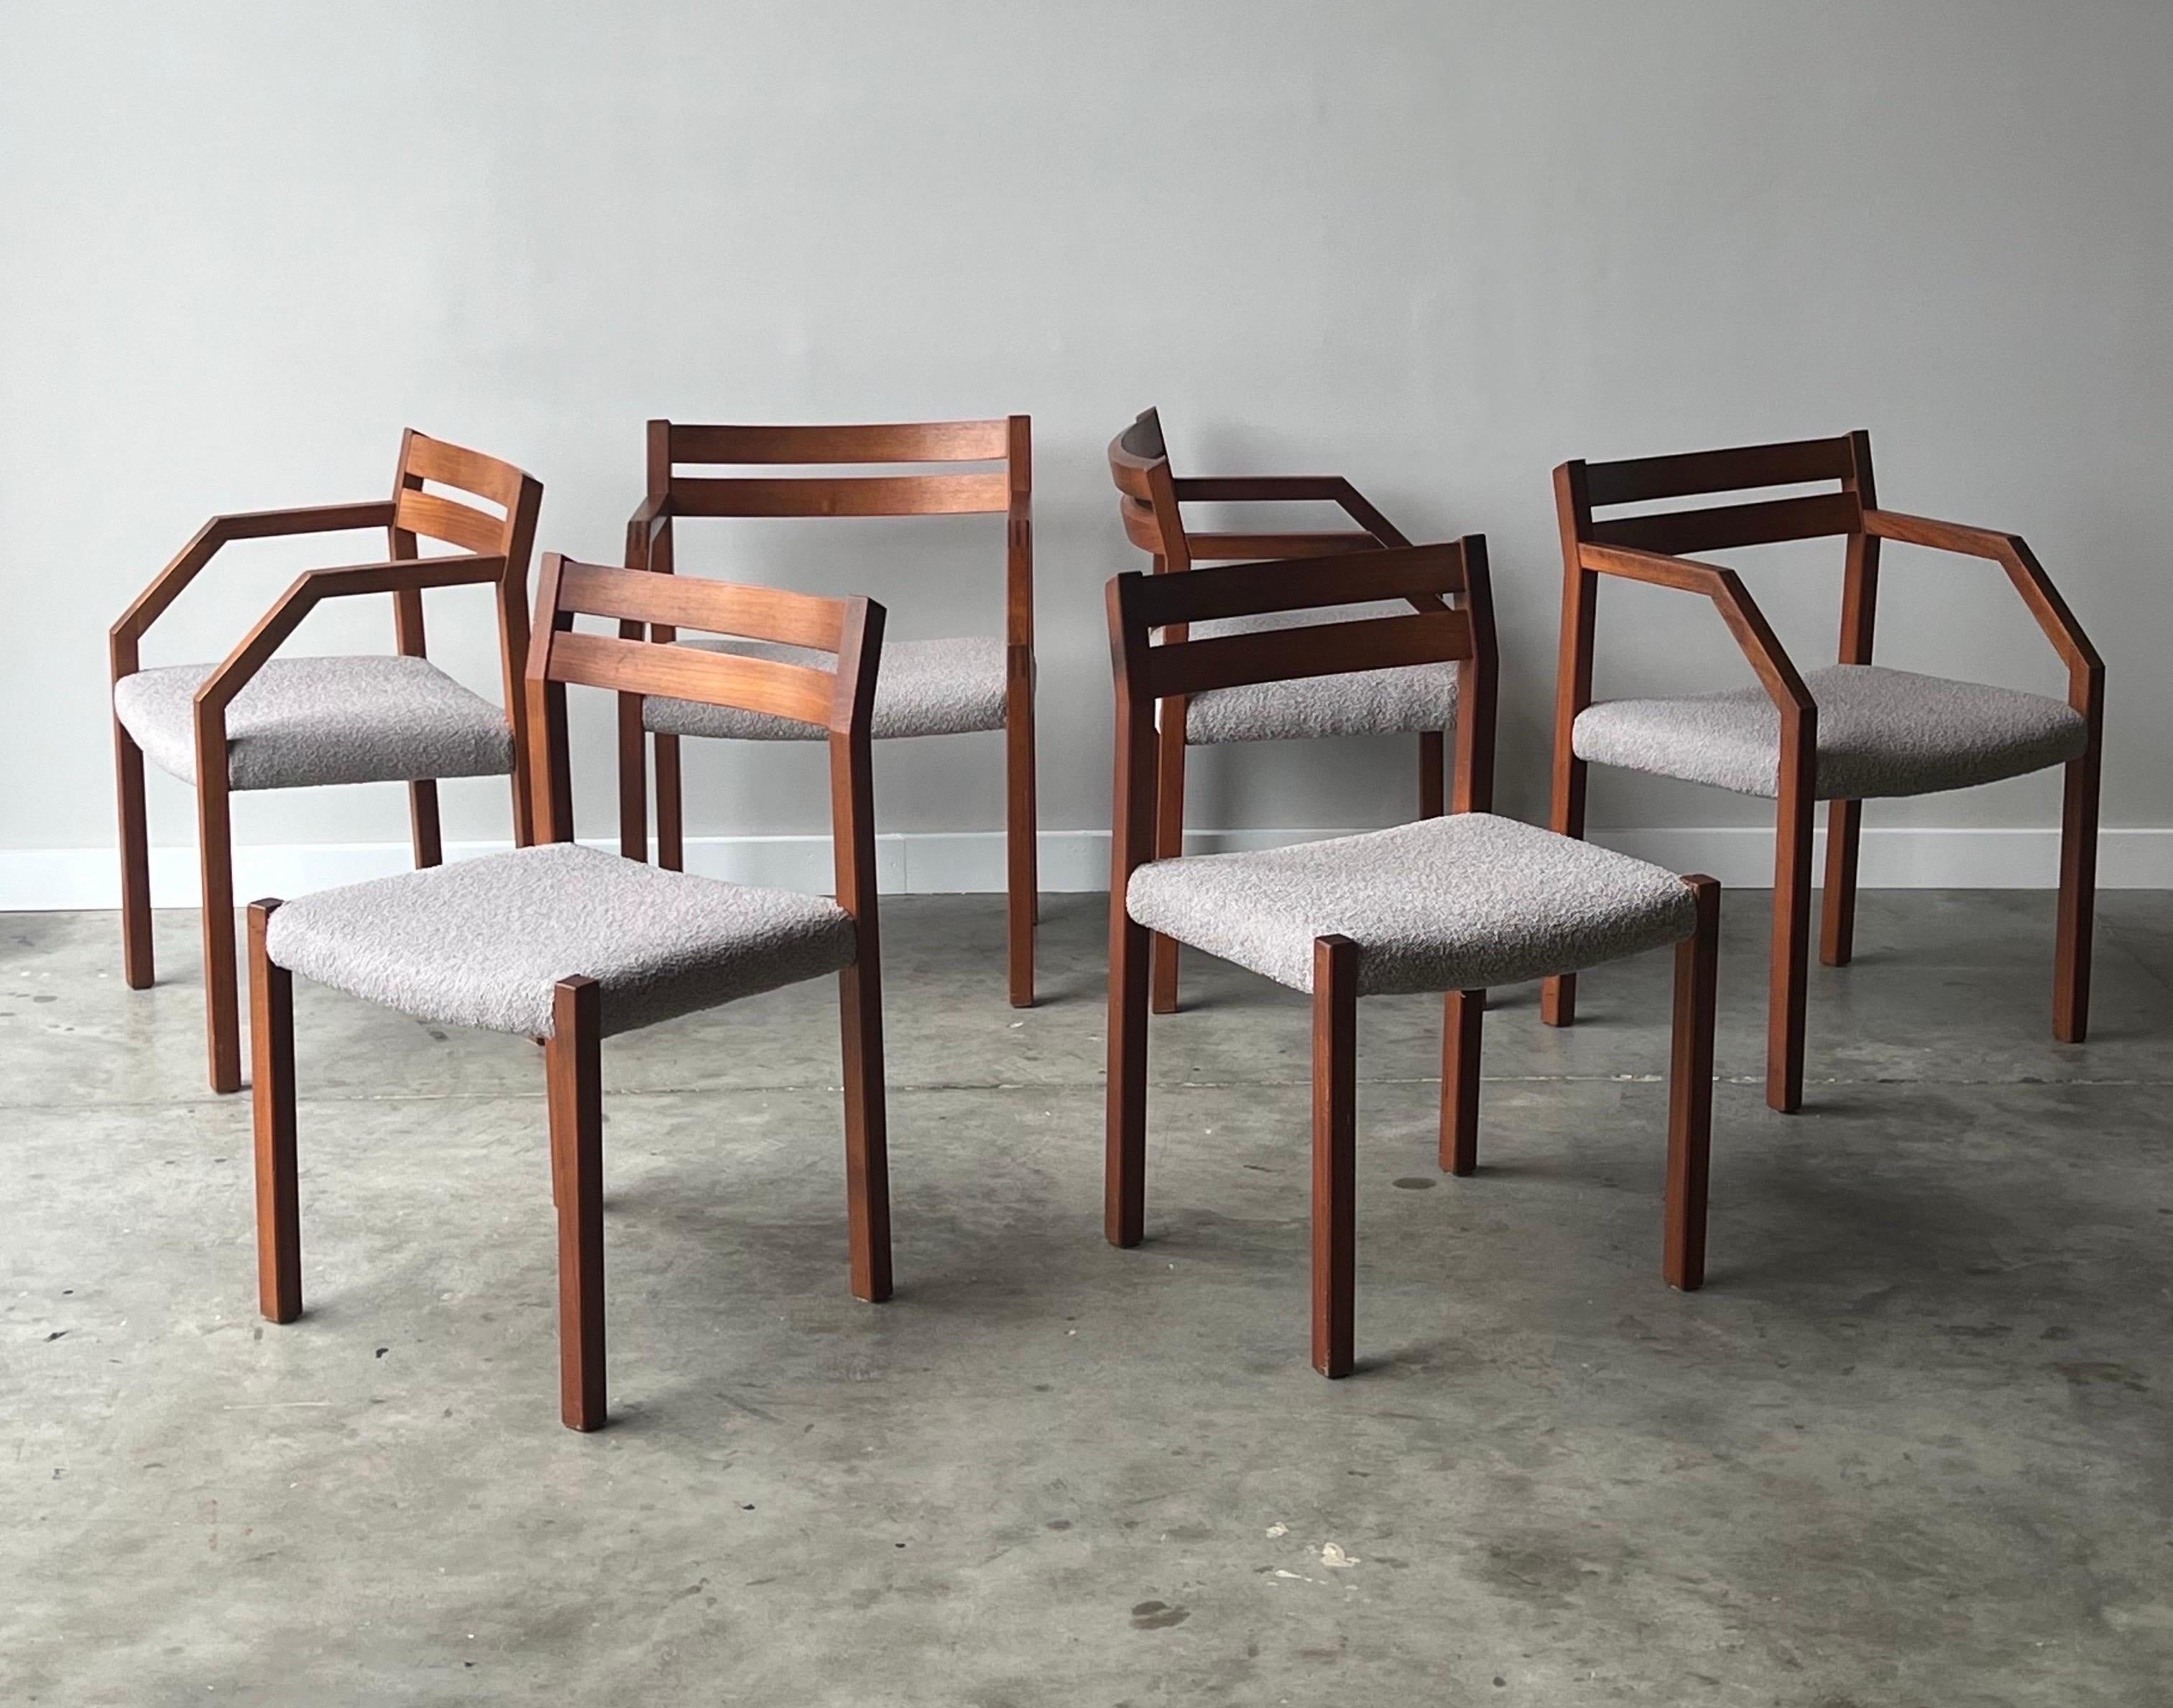 Mid-century Model 401 dining chairs designed by Niels Otto Møller for J.L. Møller, Denmark. The set of six chairs feature four armchairs and two without arms. The Model 401 chairs are made from sculpted teak and showcase excellent craftsmanship. The